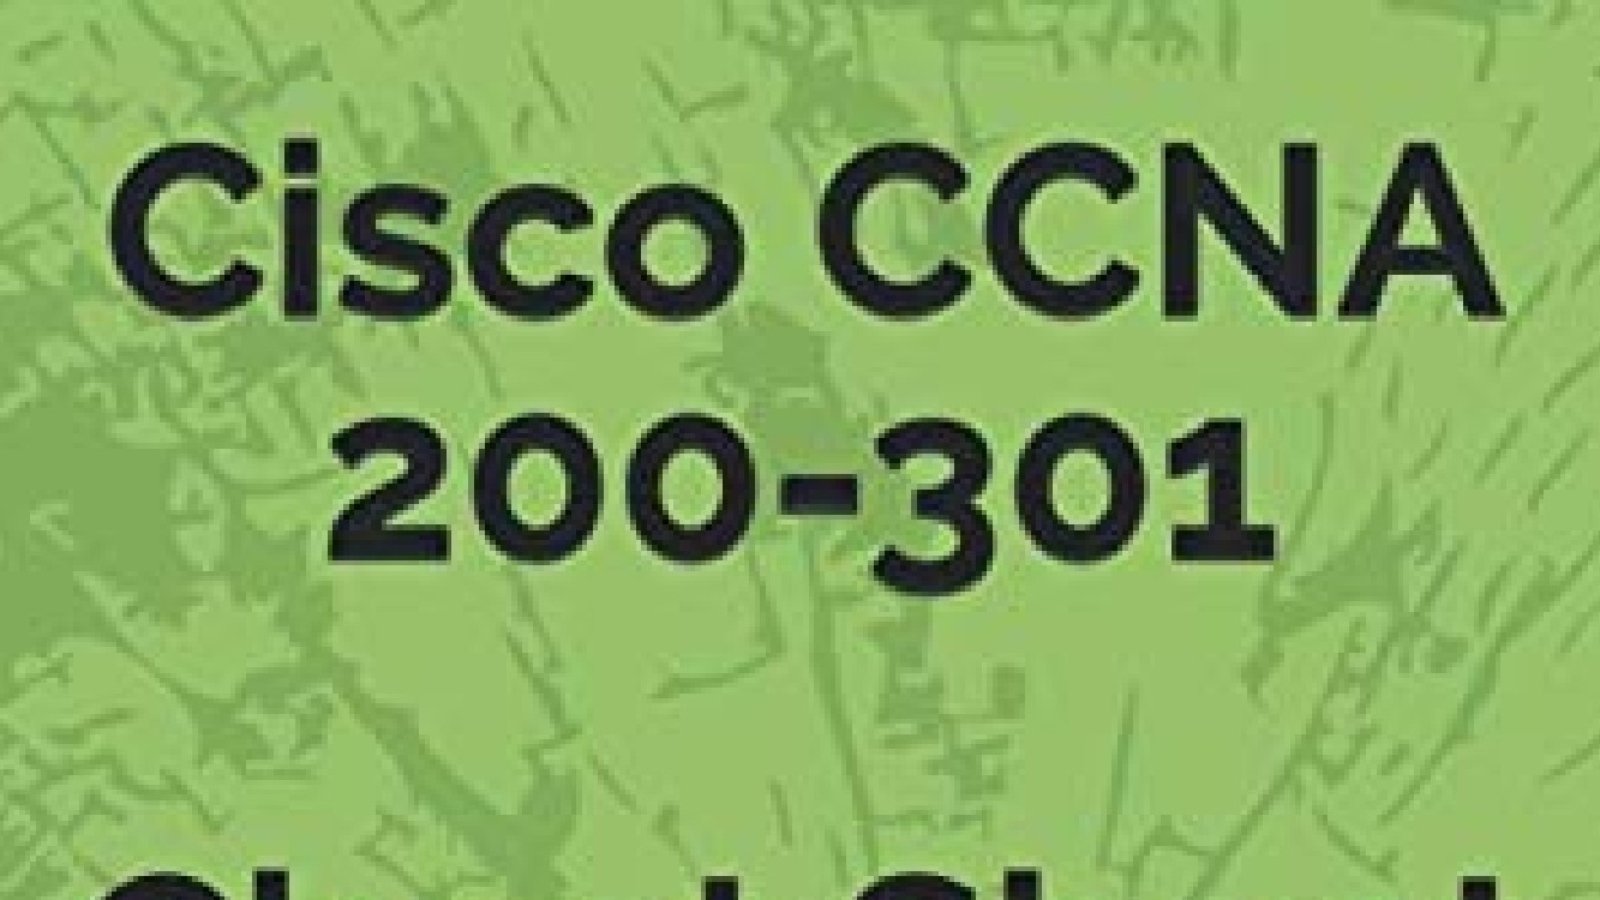 download-cisco-ccna-200-301-cheat-sheet-quick-study-guide-pass-your-200-301-exam-on-pdf